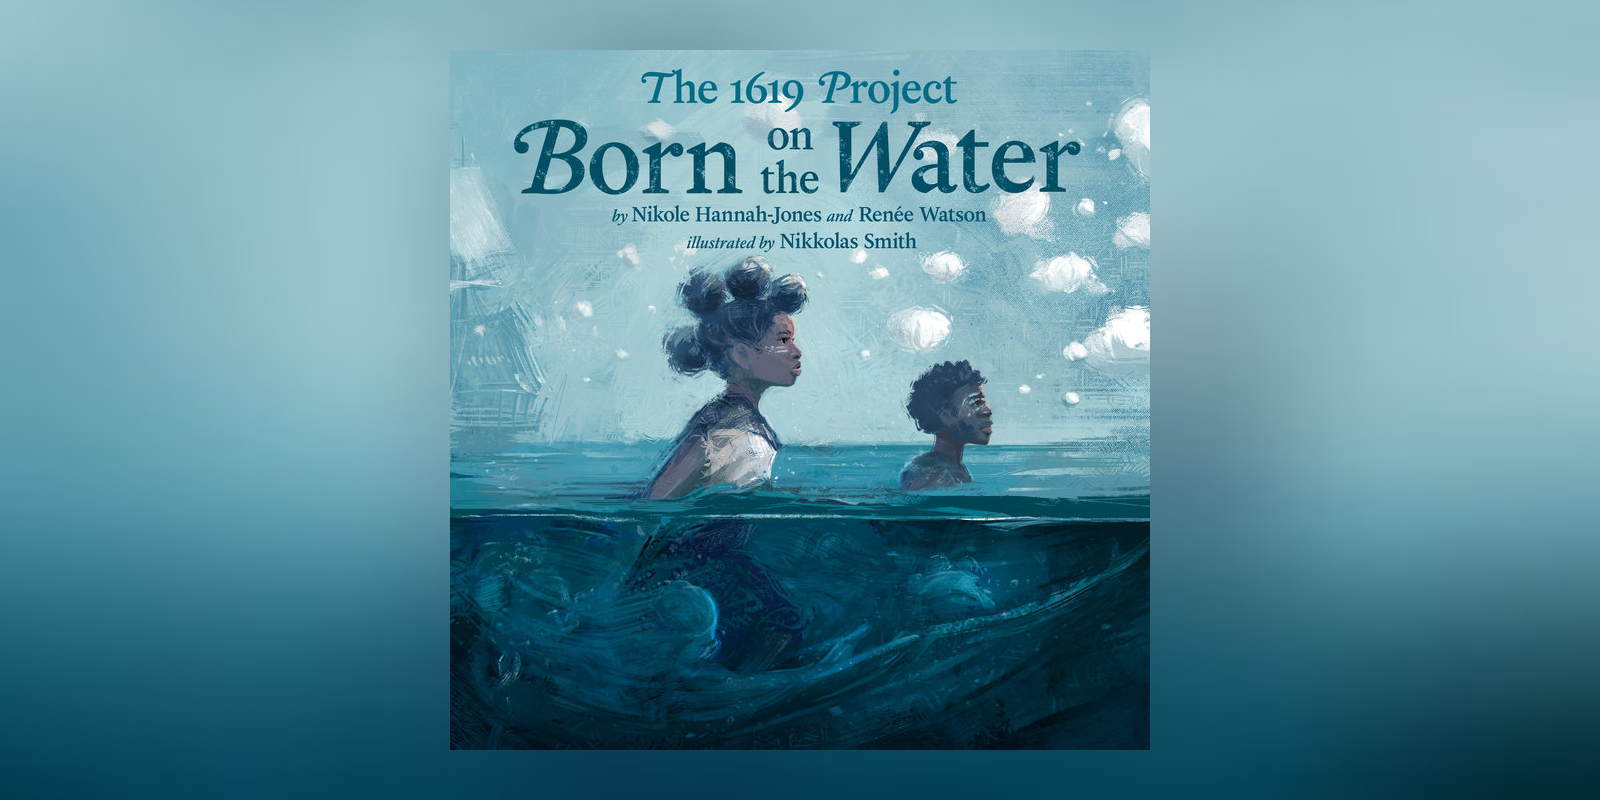 Elementary School Students Read<i>The 1619 Project: Born on the Water</i> and Meet with the Book’s Creators